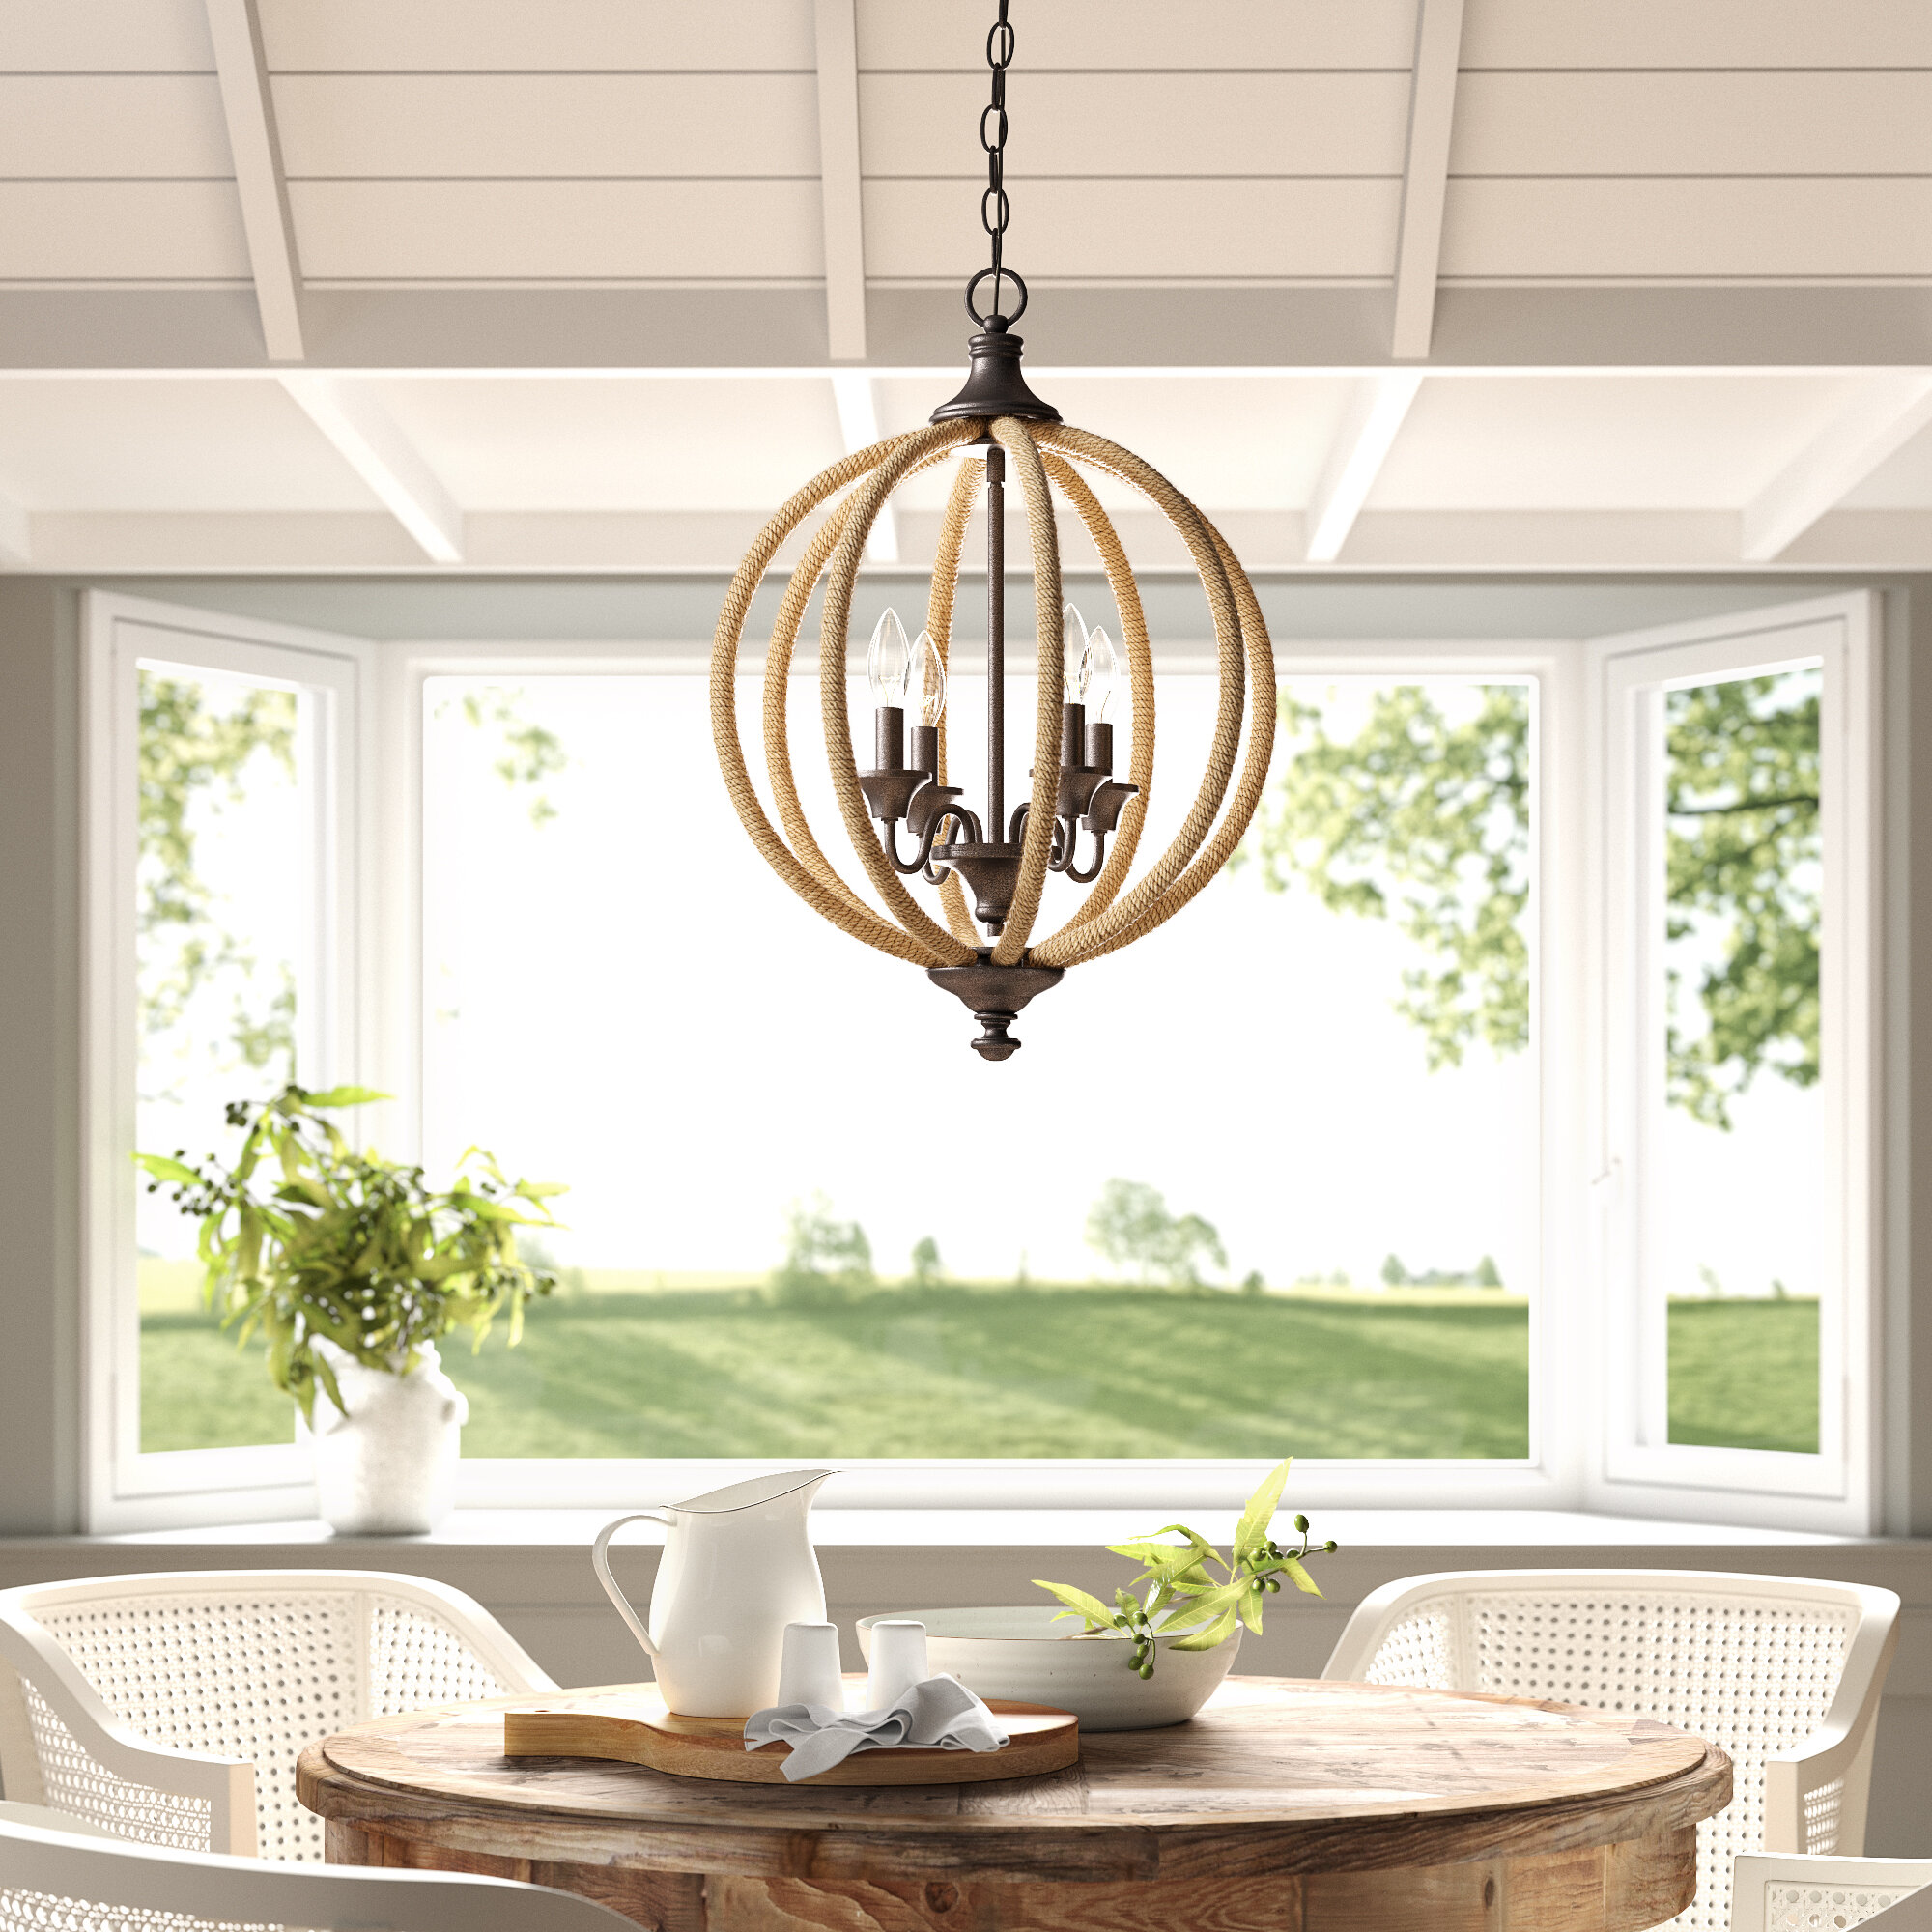 Rustic Chandeliers Free Shipping Over 35 Wayfair